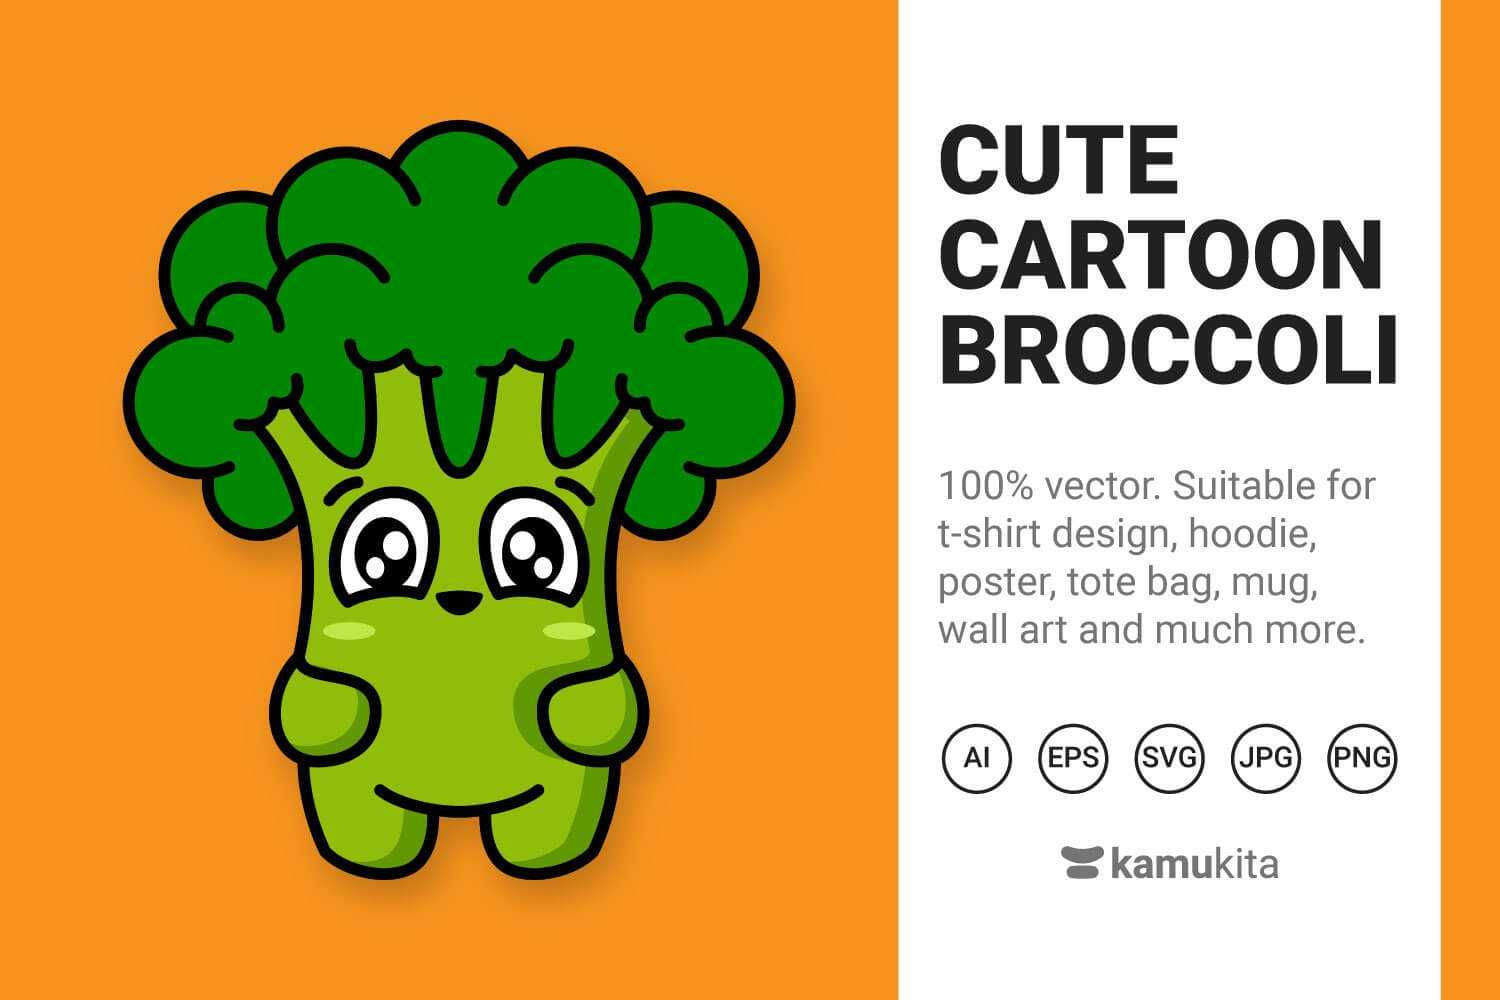 Green small broccoli is drawn on an orange background.